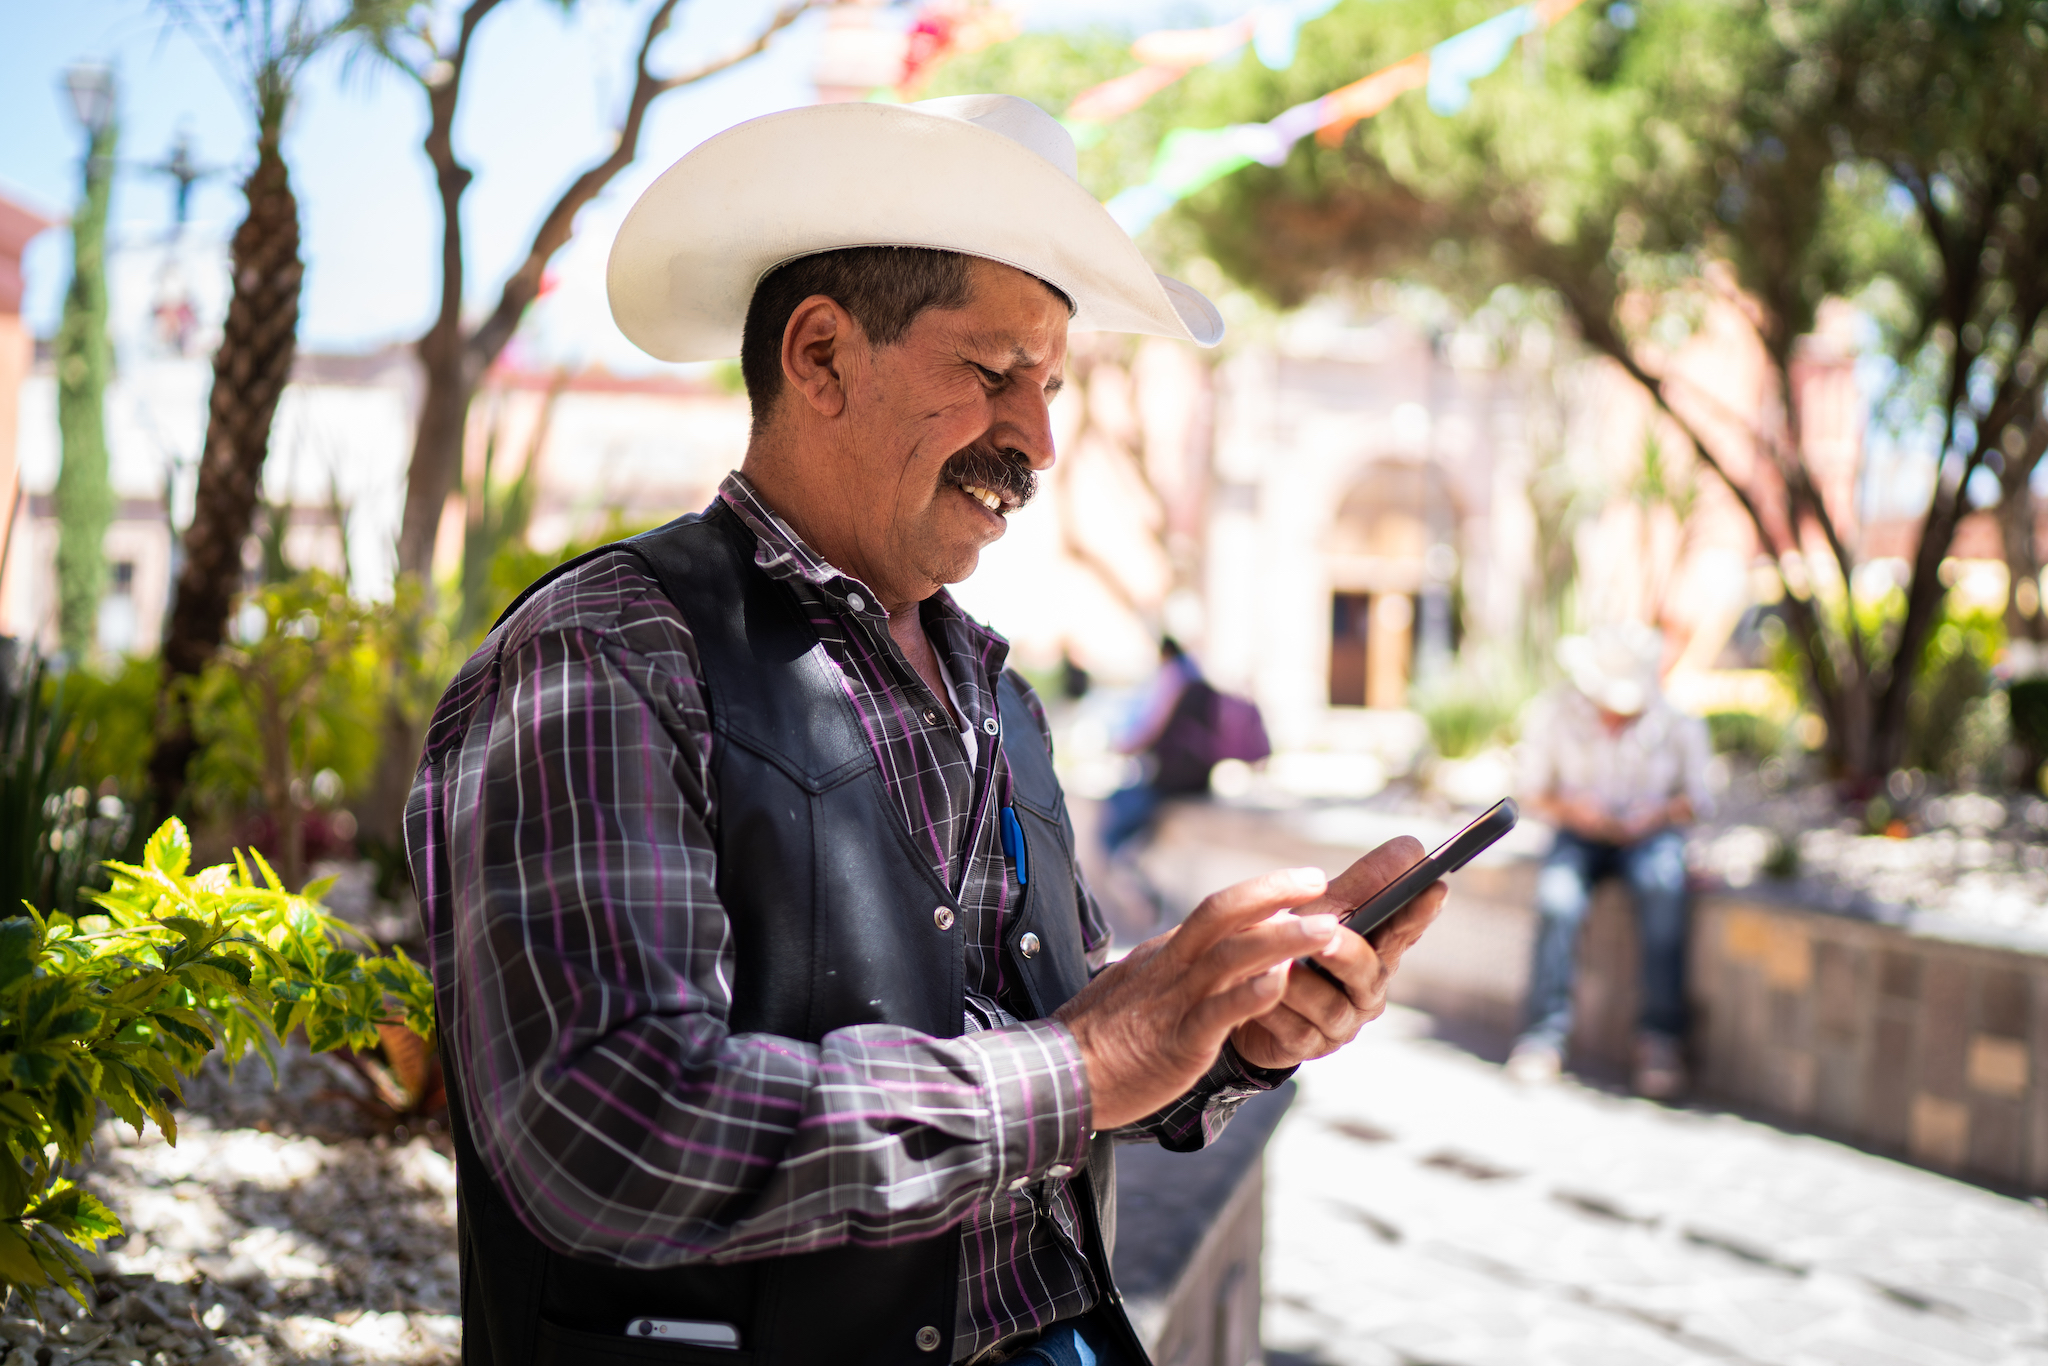 A photo of a person with short hair and a mustache wearing a cowboy hat stands outside using a smart phone.